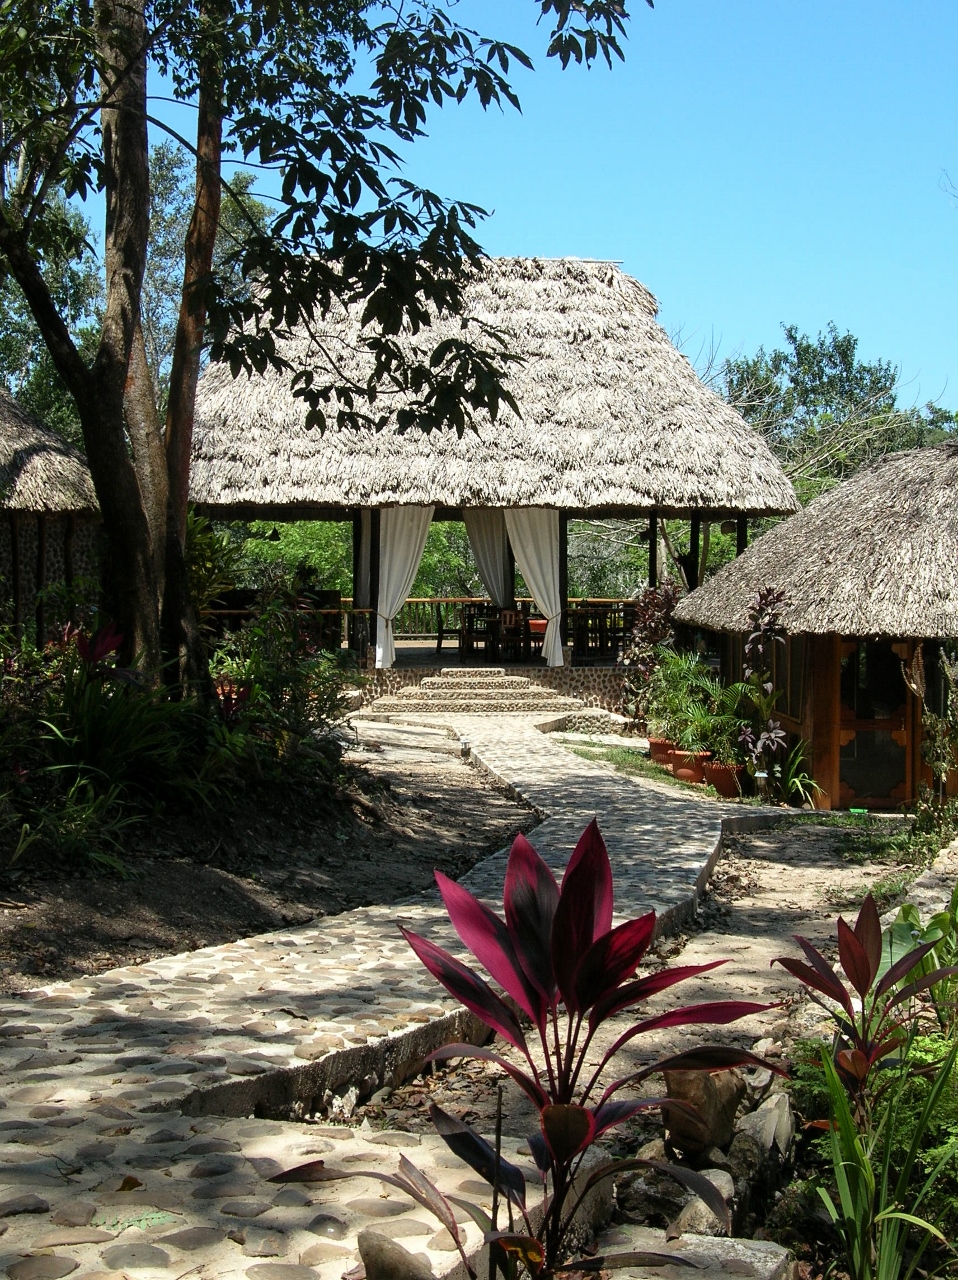 Table Rock Lodge - Belize Jungle Lodges -Cayo District - All Inclusive Vacation Packages to Belize - SabreWing Travel 